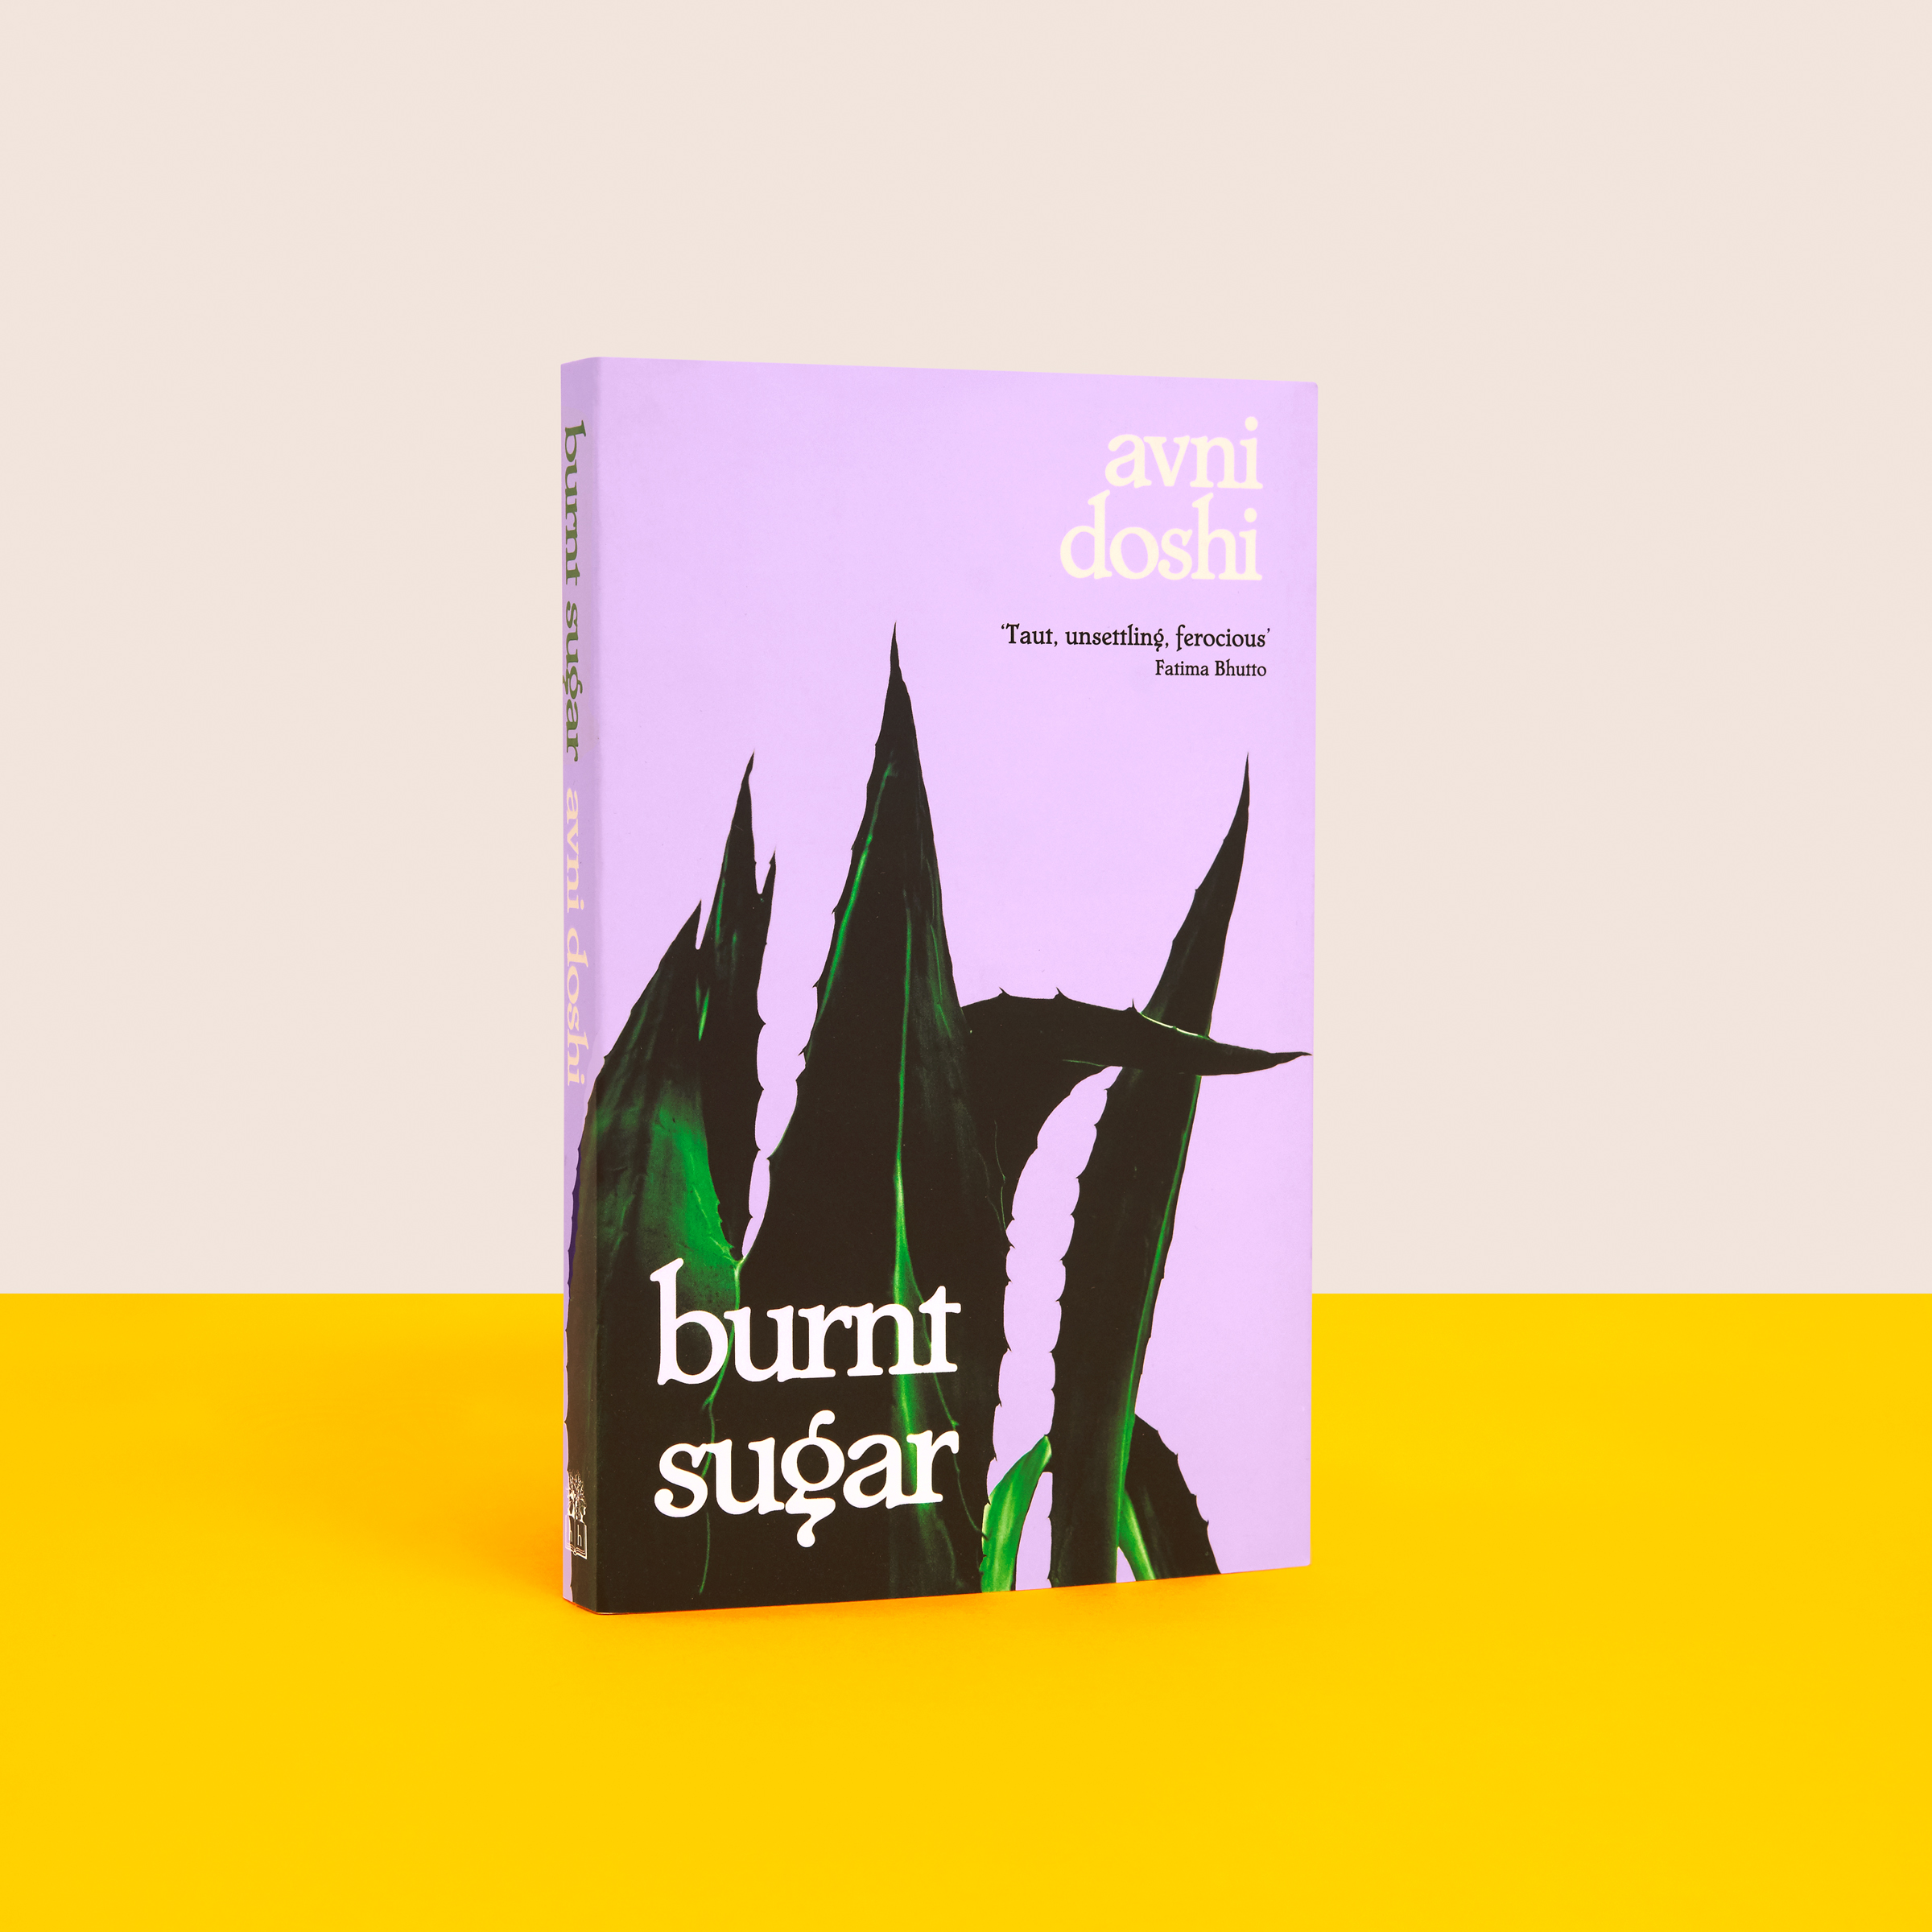 Burnt Sugar by Avni Doshi on a yellow and cream background.